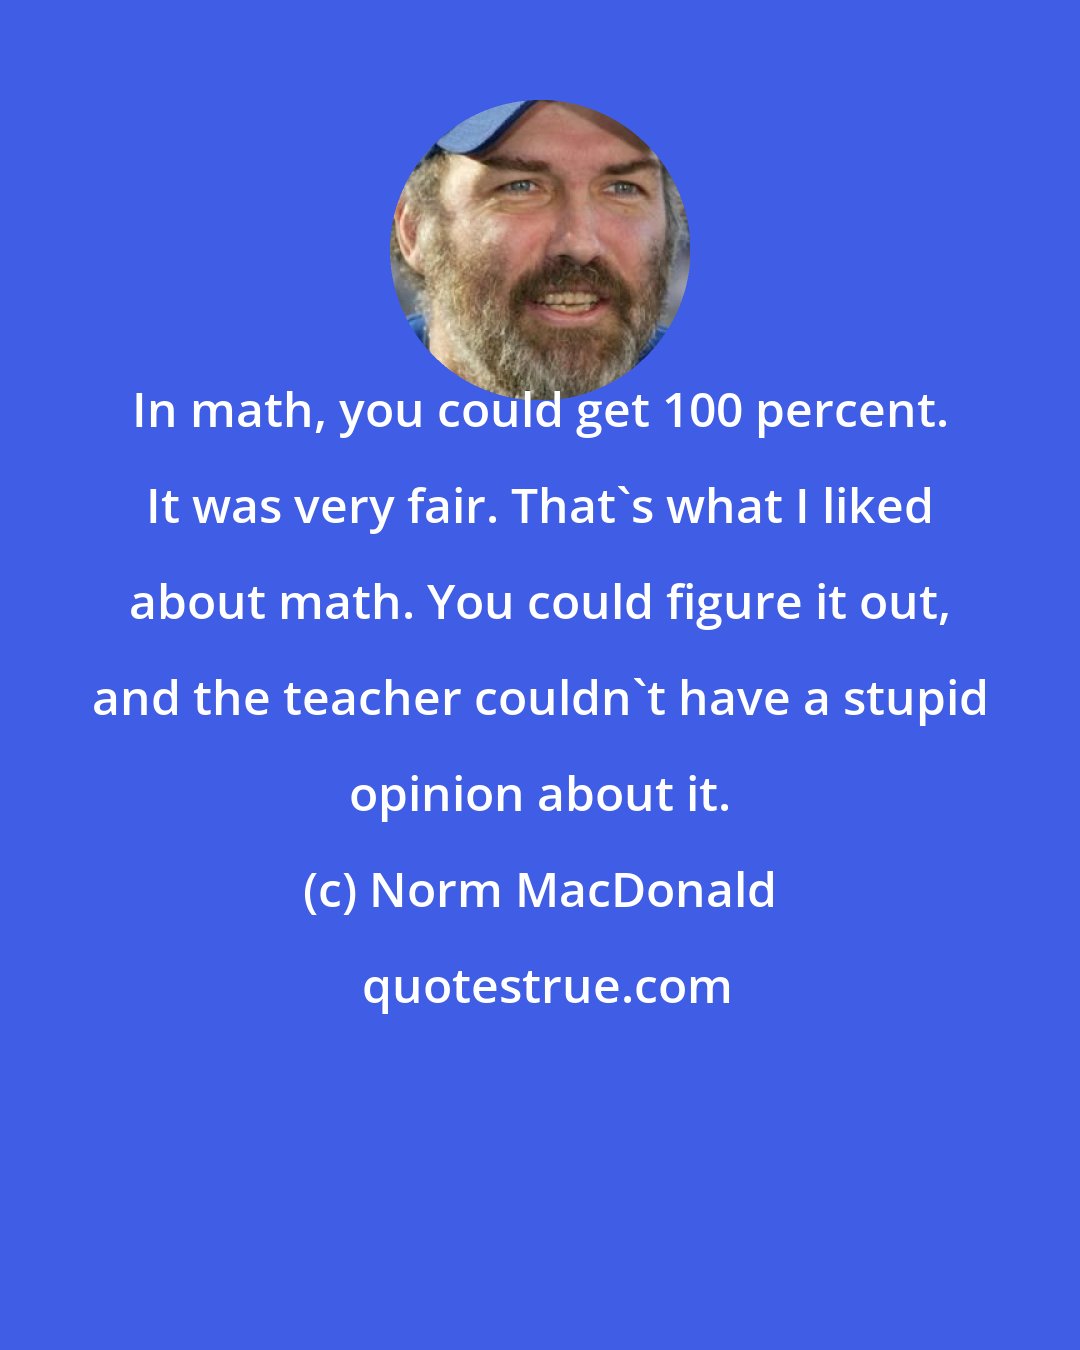 Norm MacDonald: In math, you could get 100 percent. It was very fair. That's what I liked about math. You could figure it out, and the teacher couldn't have a stupid opinion about it.